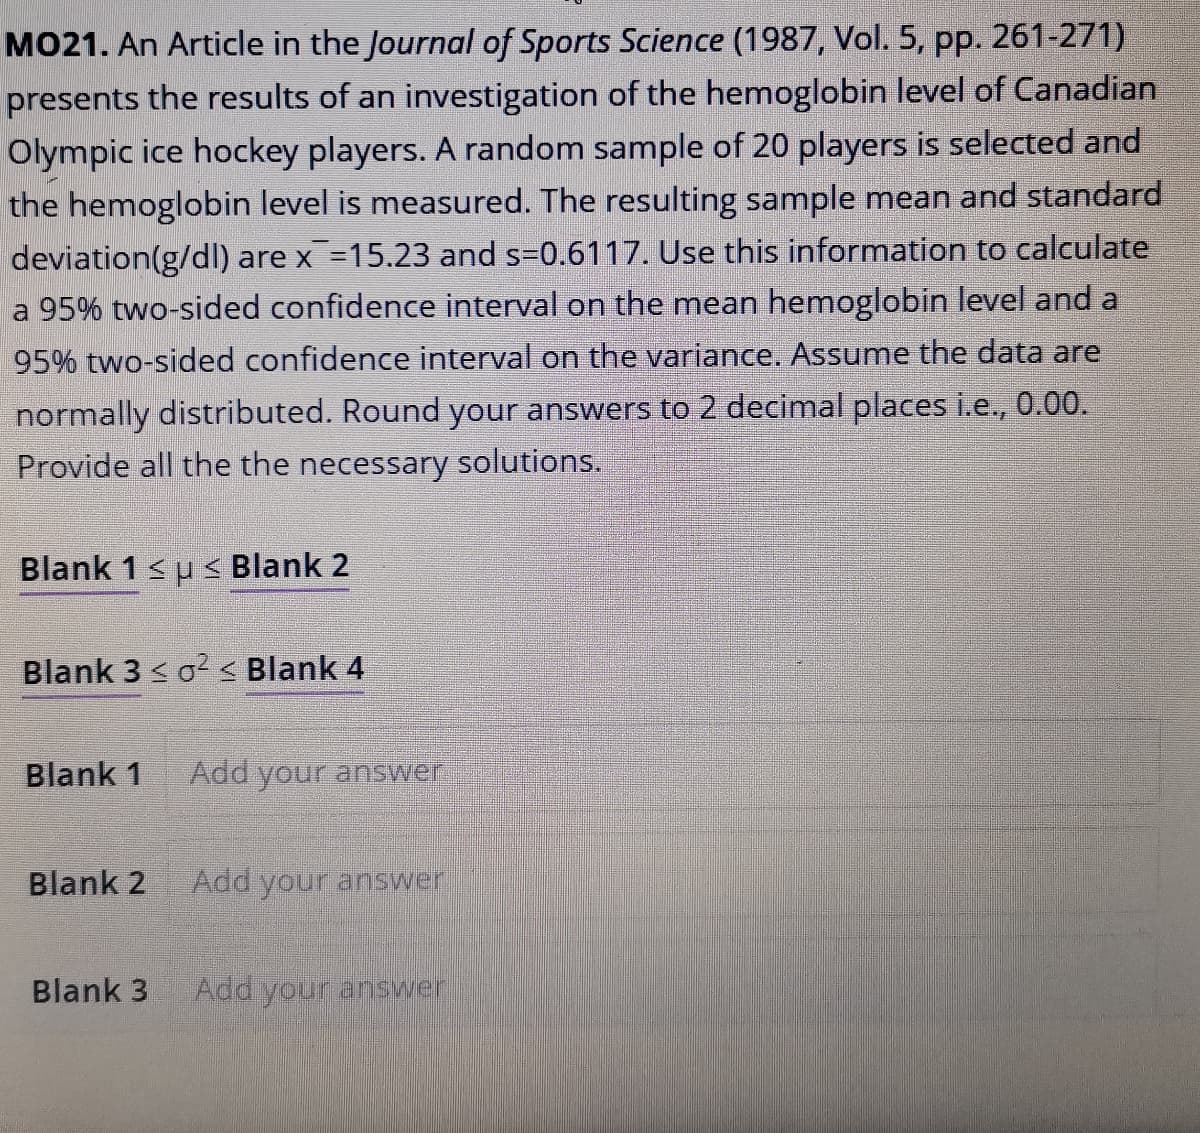 MO21. An Article in the Journal of Sports Science (1987, Vol. 5, pp. 261-271)
presents the results of an investigation of the hemoglobin level of Canadian
Olympic ice hockey players. A random sample of 20 players is selected and
the hemoglobin level is measured. The resulting sample mean and standard
deviation(g/dI) are x =15.23 and s=0.6117. Use this information to calculate
a 95% two-sided confidence interval on the mean hemoglobin level and a
95% two-sided confidence interval on the variance. Assume the data are
normally distributed. Round your answers to 2 decimal places i.e., 0.00.
Provide all the the necessary solutions.
Blank 1su < Blank 2
Blank 3 <o < Blank 4
Blank 1
Add your answer
Blank 2
Add your answer
Blank 3
Add your answer
